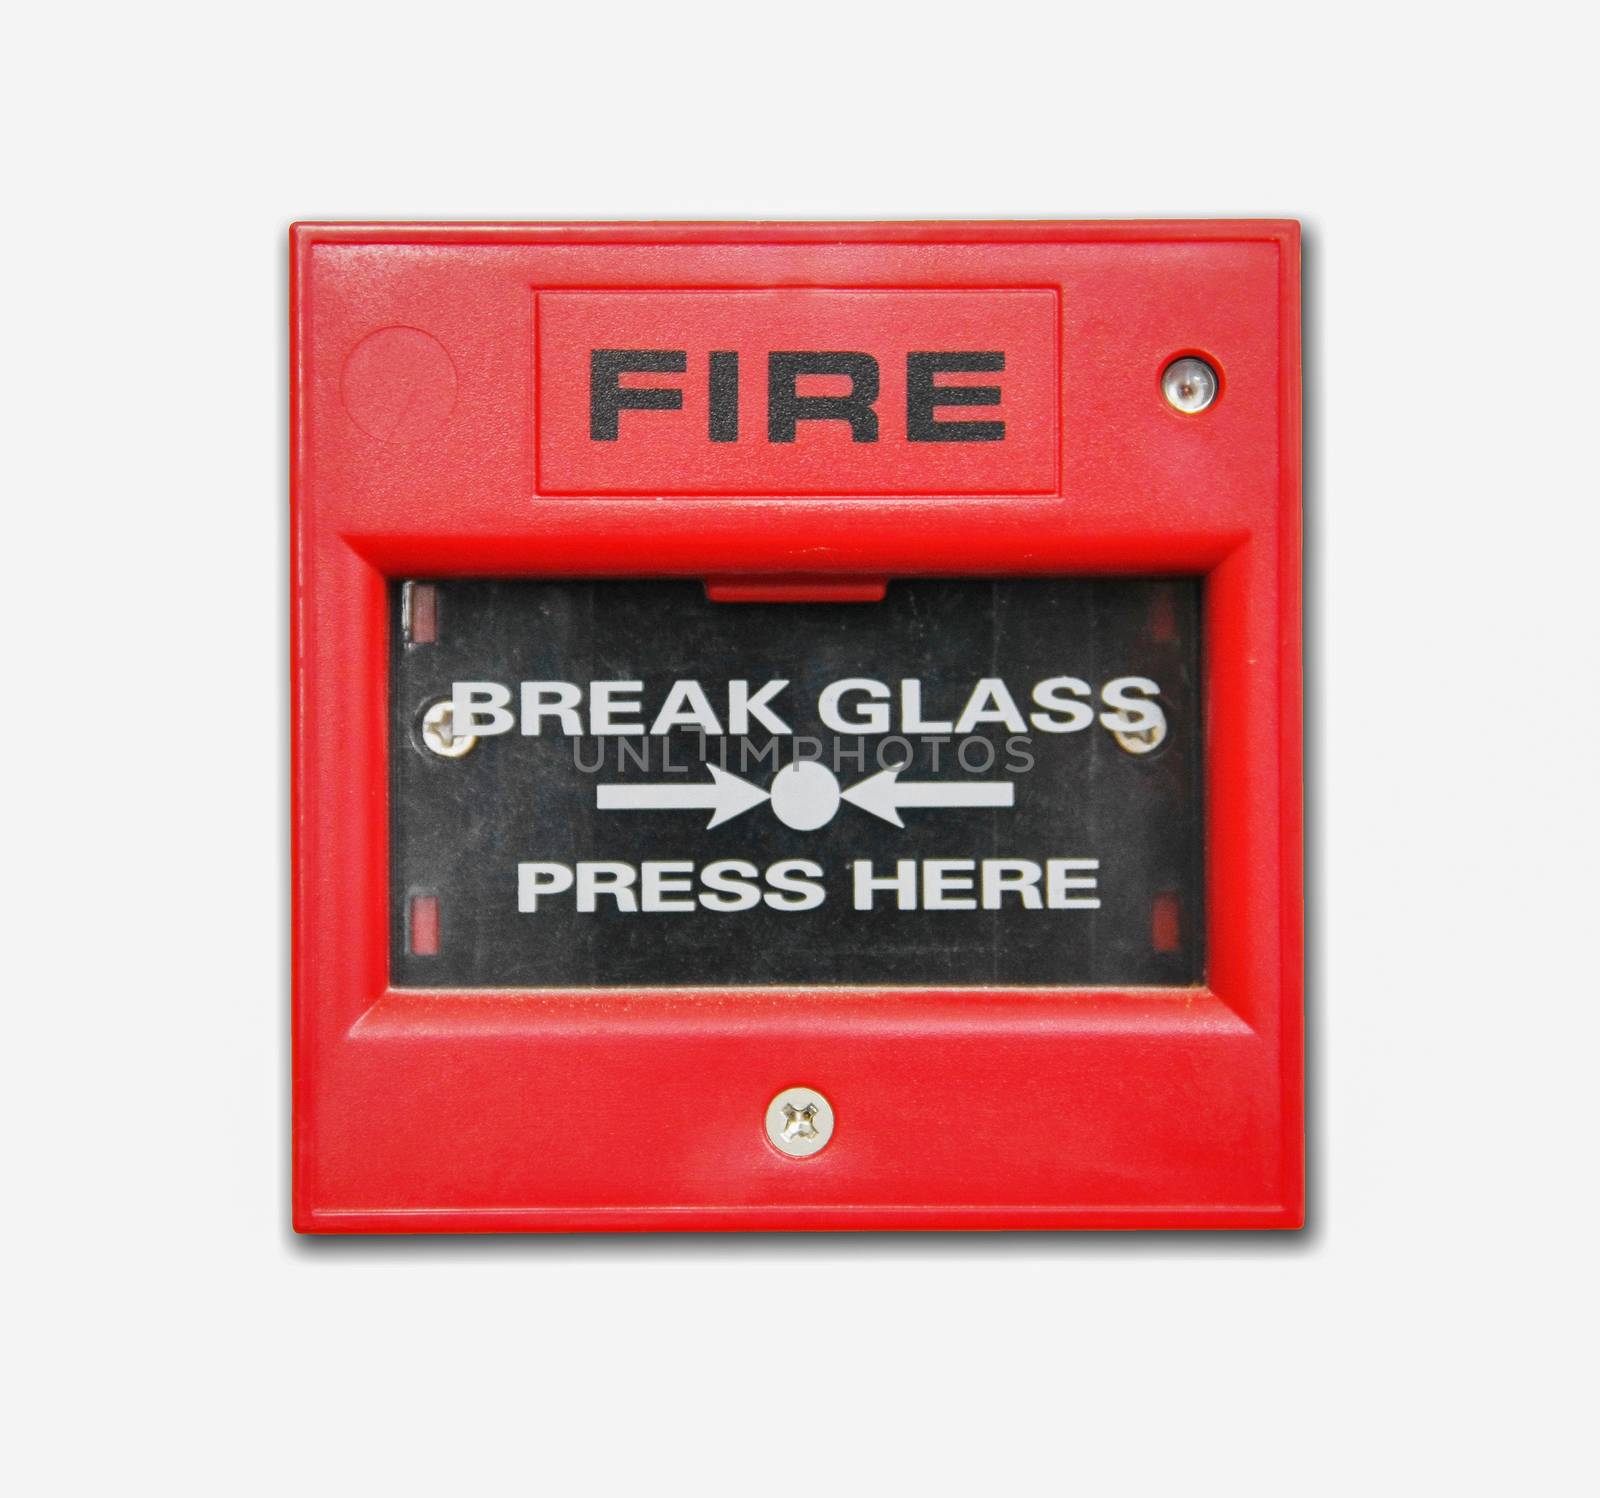 isolate red fire alarm box on white background